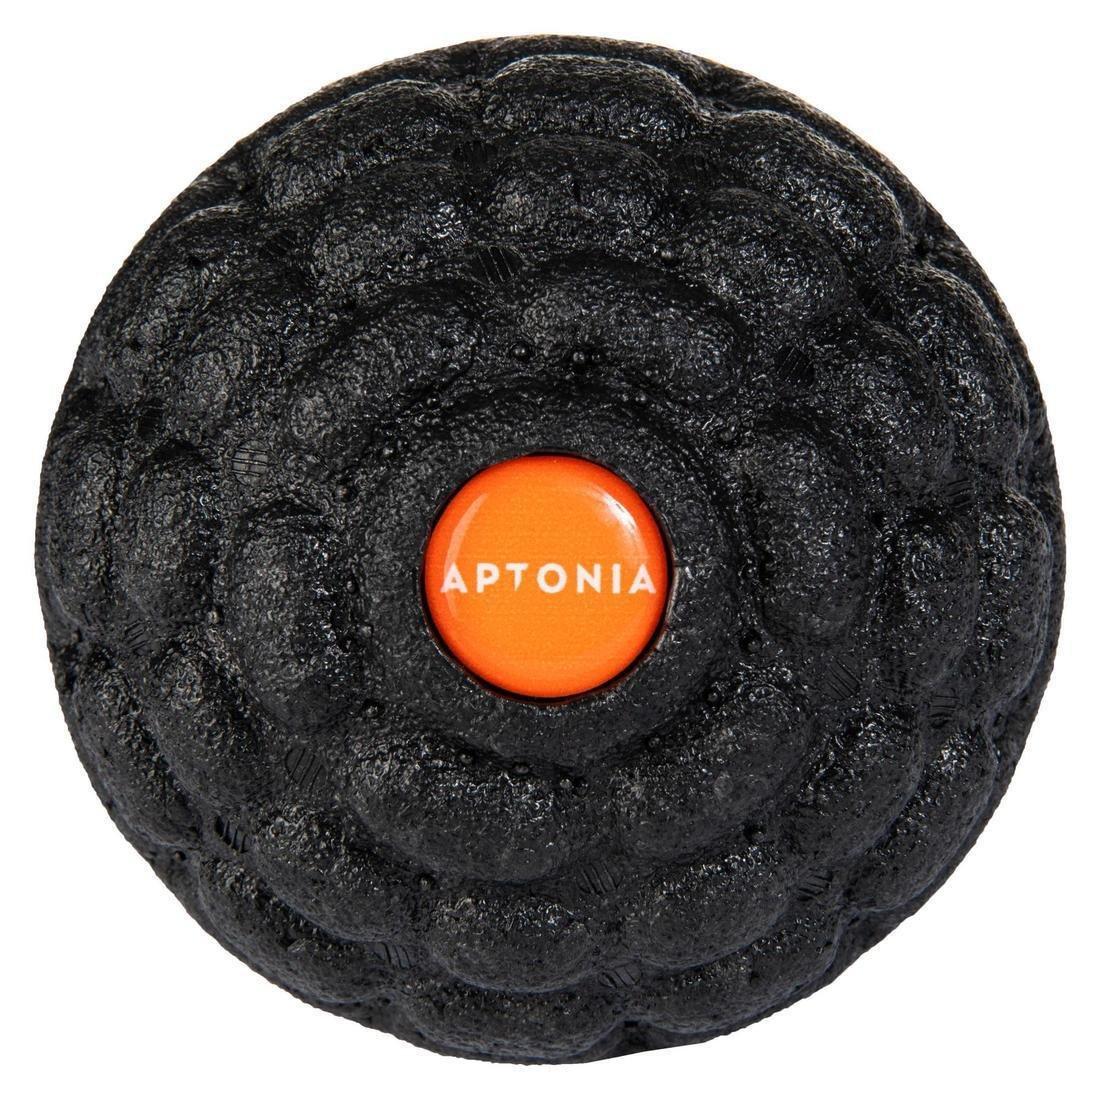 DECATHLON - Discovery 100 3-in-1 Massage Kit: Massage ball, stick and roller, Black